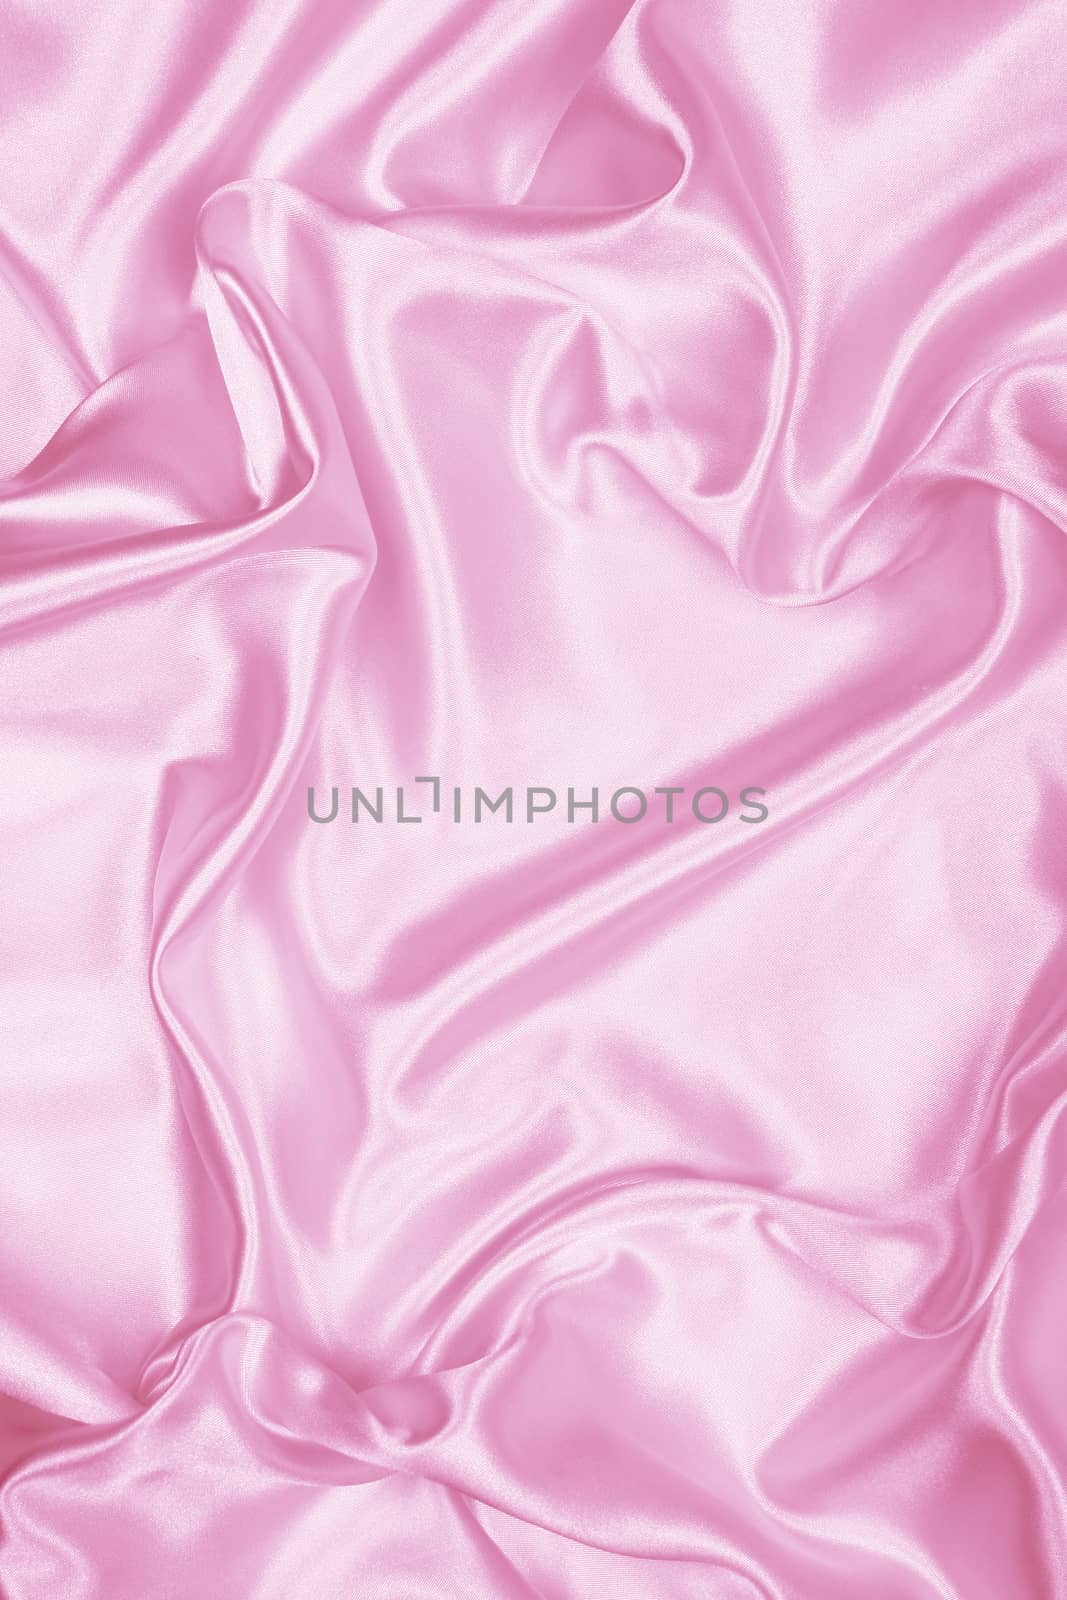 Smooth elegant pink silk can use as background  by oxanatravel